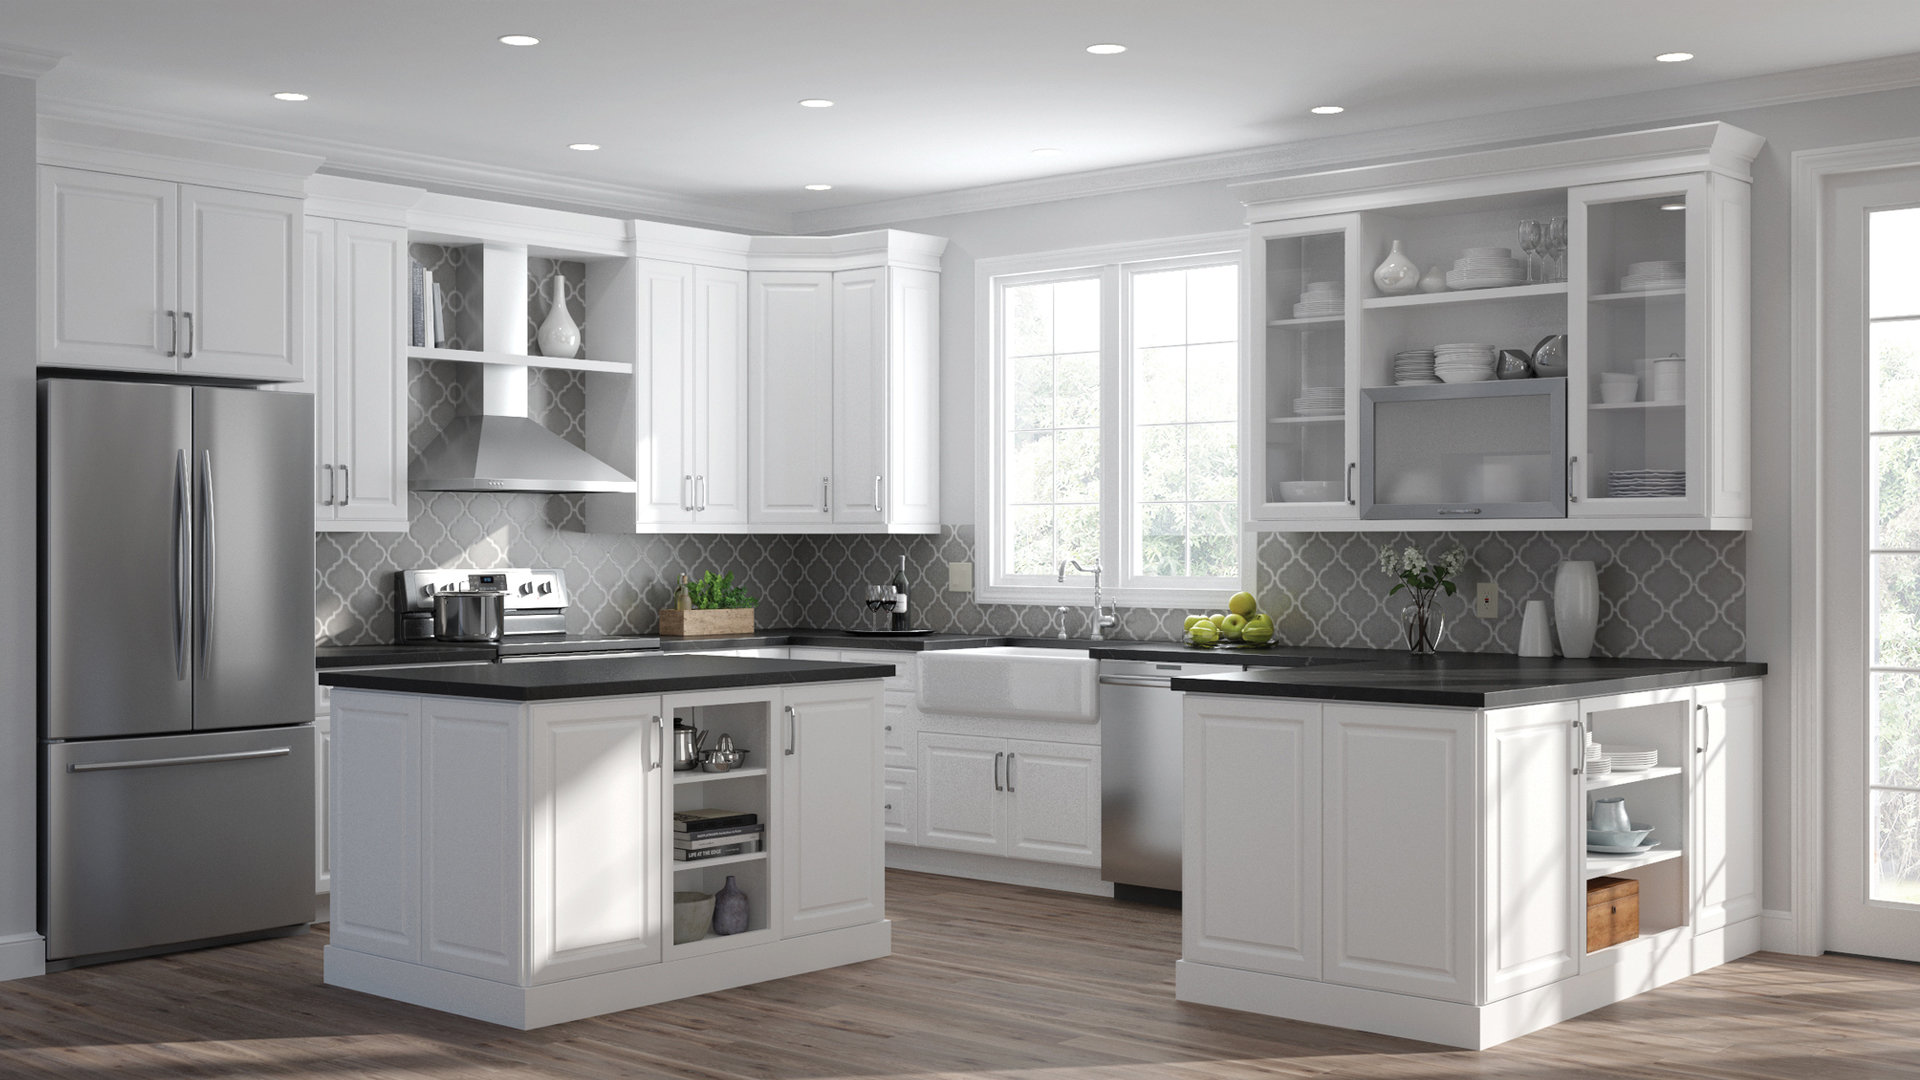 Elgin Wall Cabinets In White Kitchen, Home Depot In Stock White Kitchen Cabinets